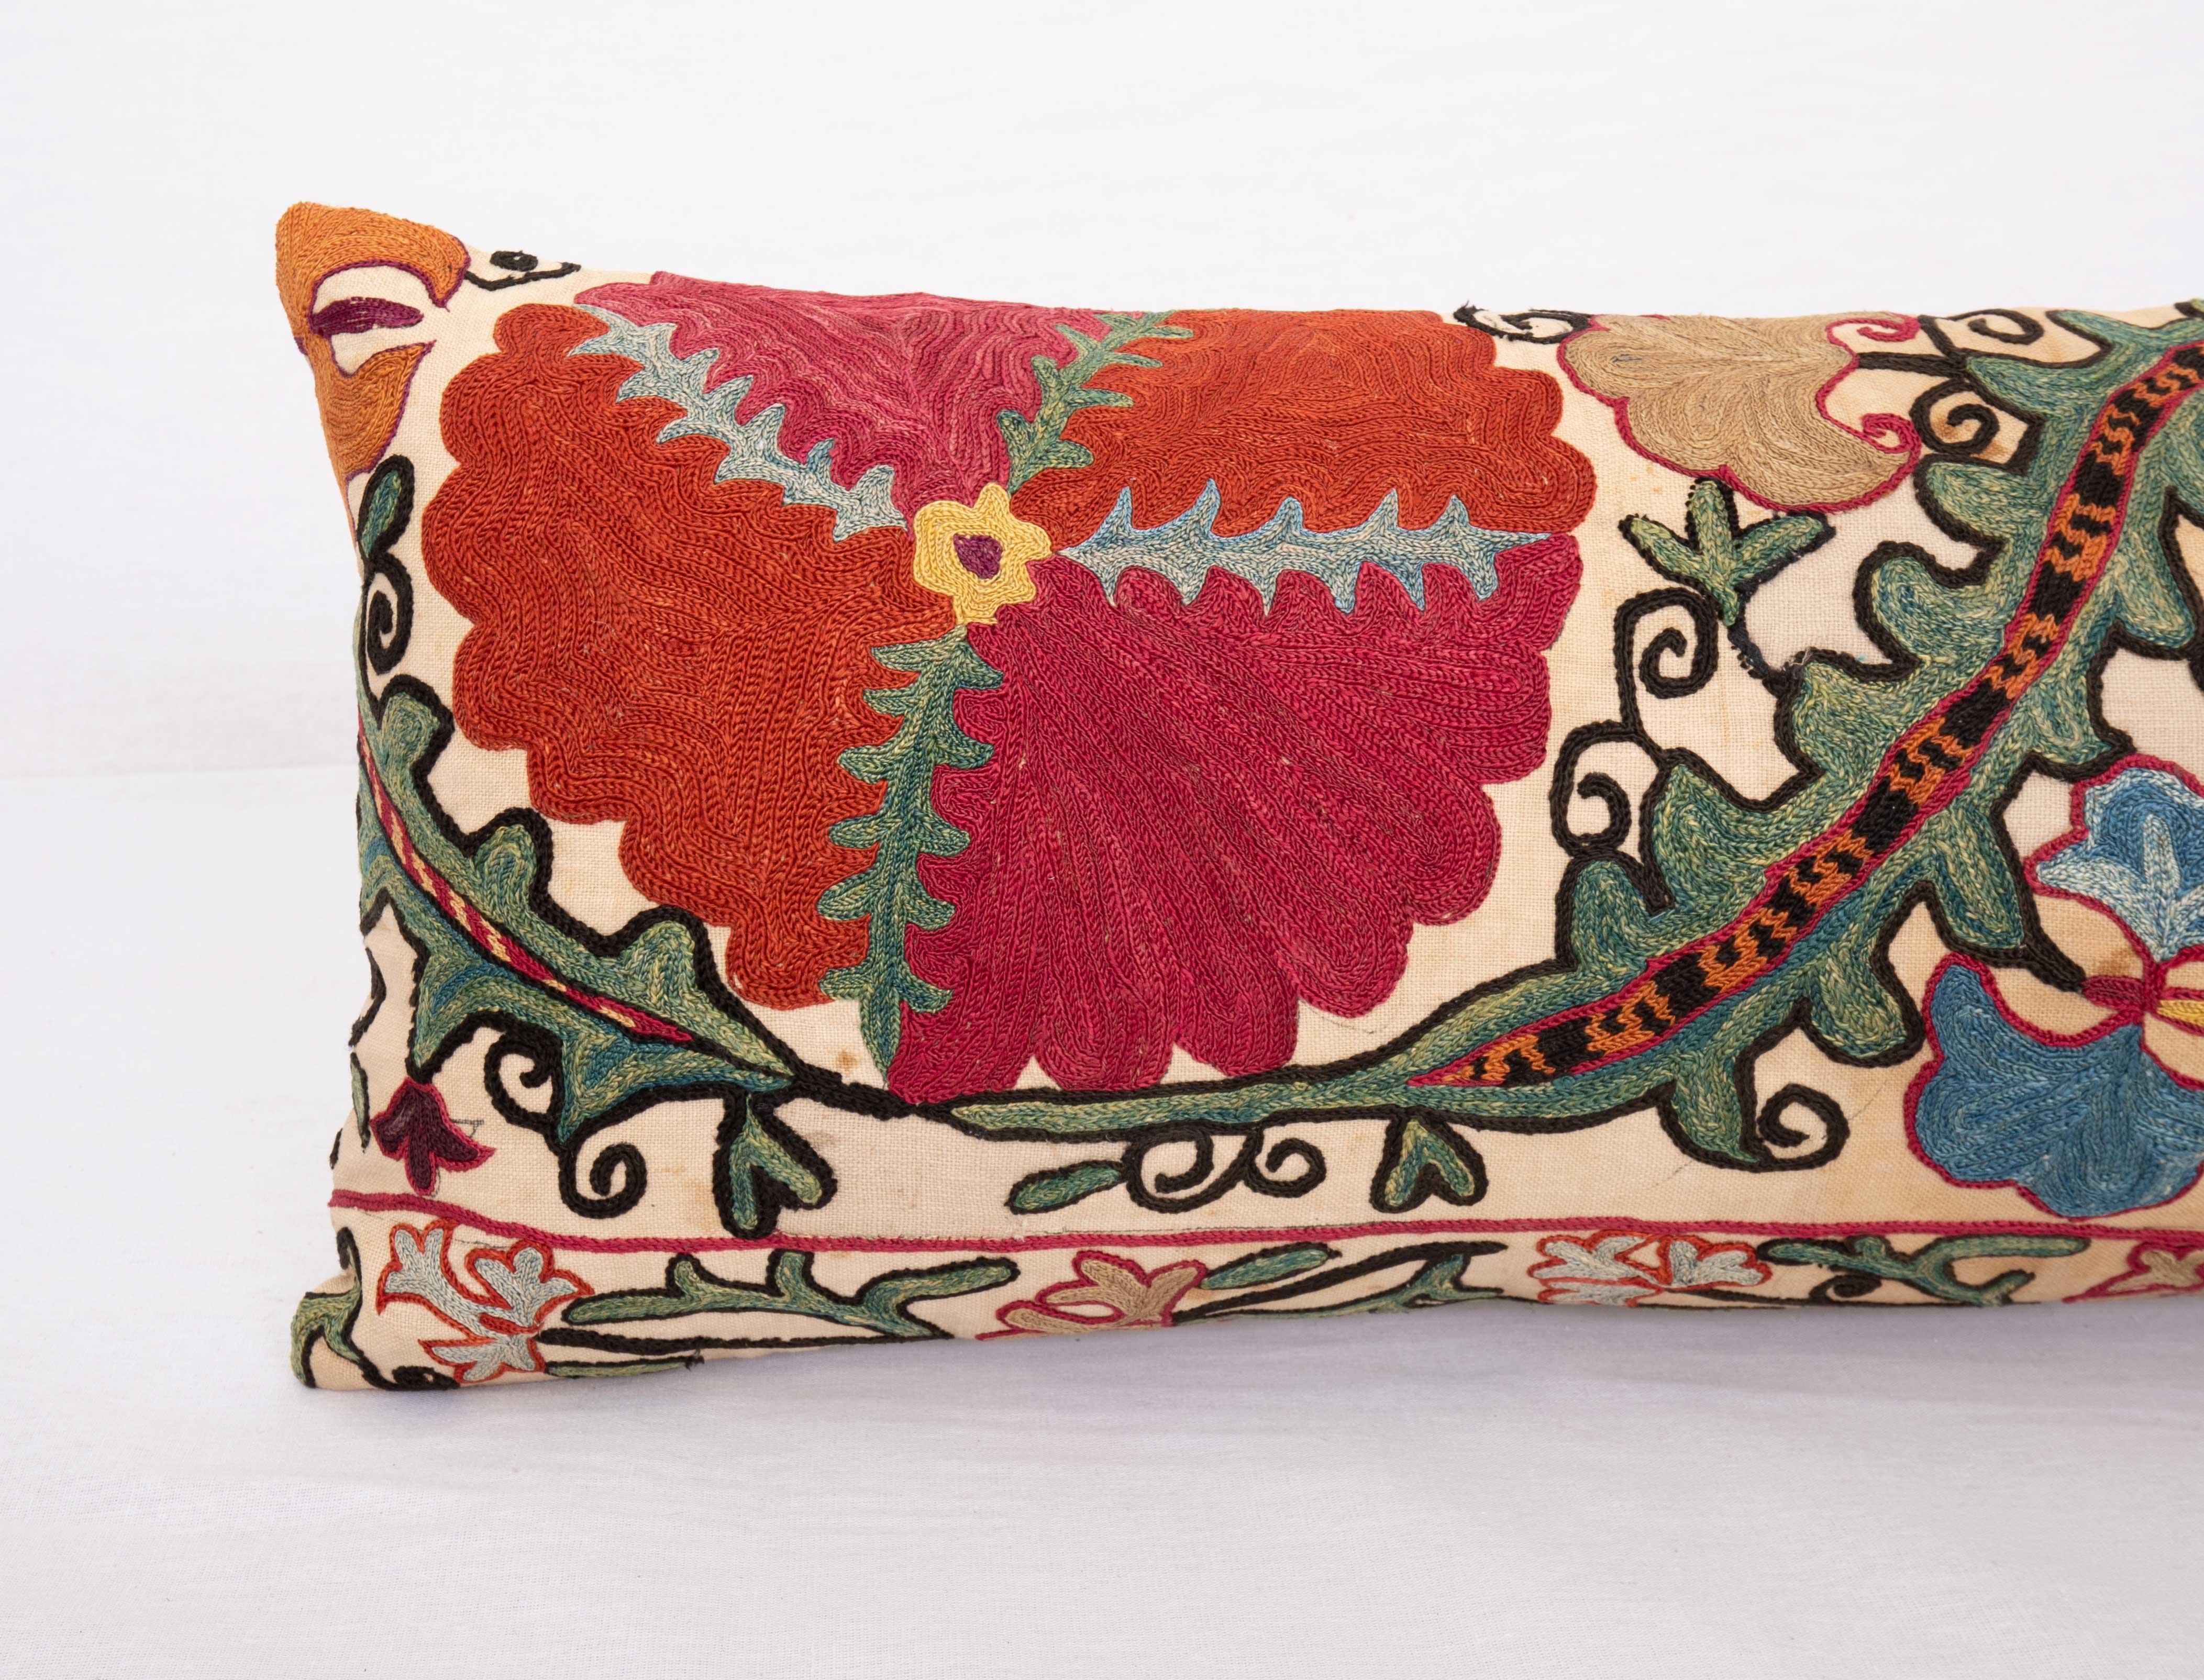 Uzbek Suzani Pillow Case Made from an Antique Suzani Fragment, 19th C